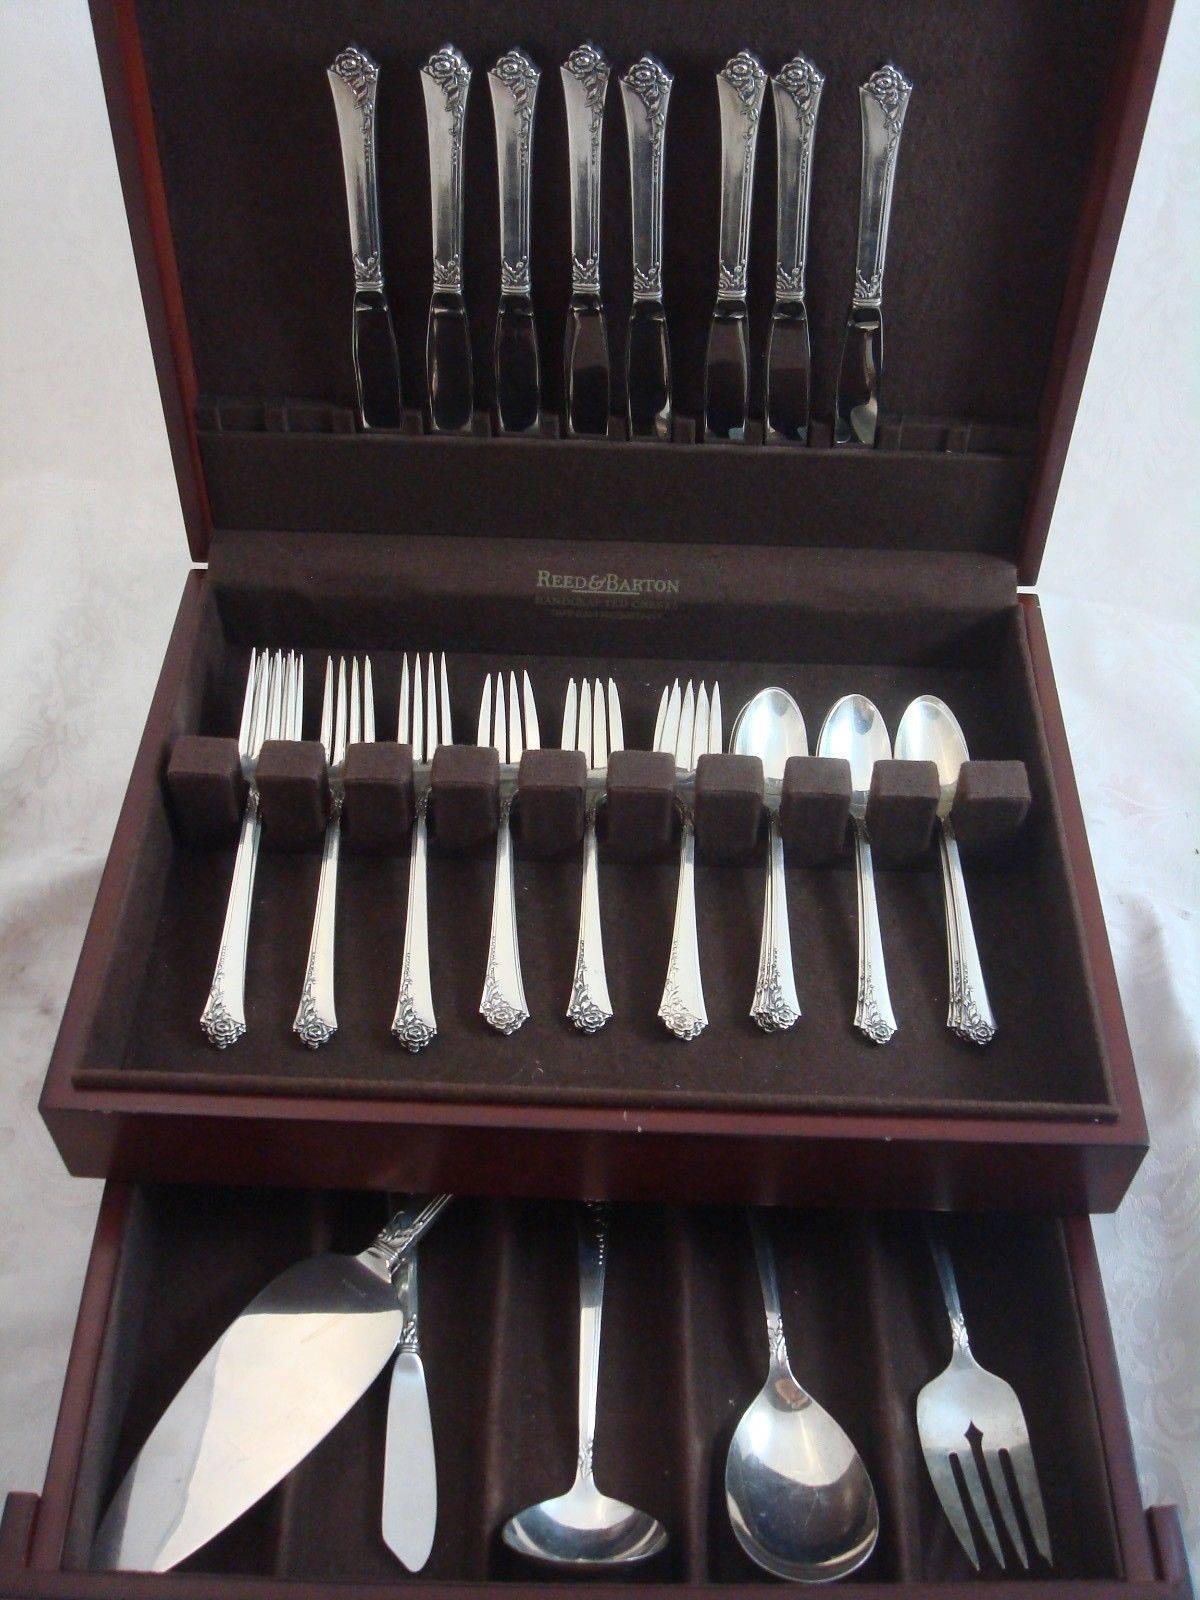 Damask Rose by Oneida sterling silver flatware set, 37 piece set. This set includes: 

eight knives, 8 7/8